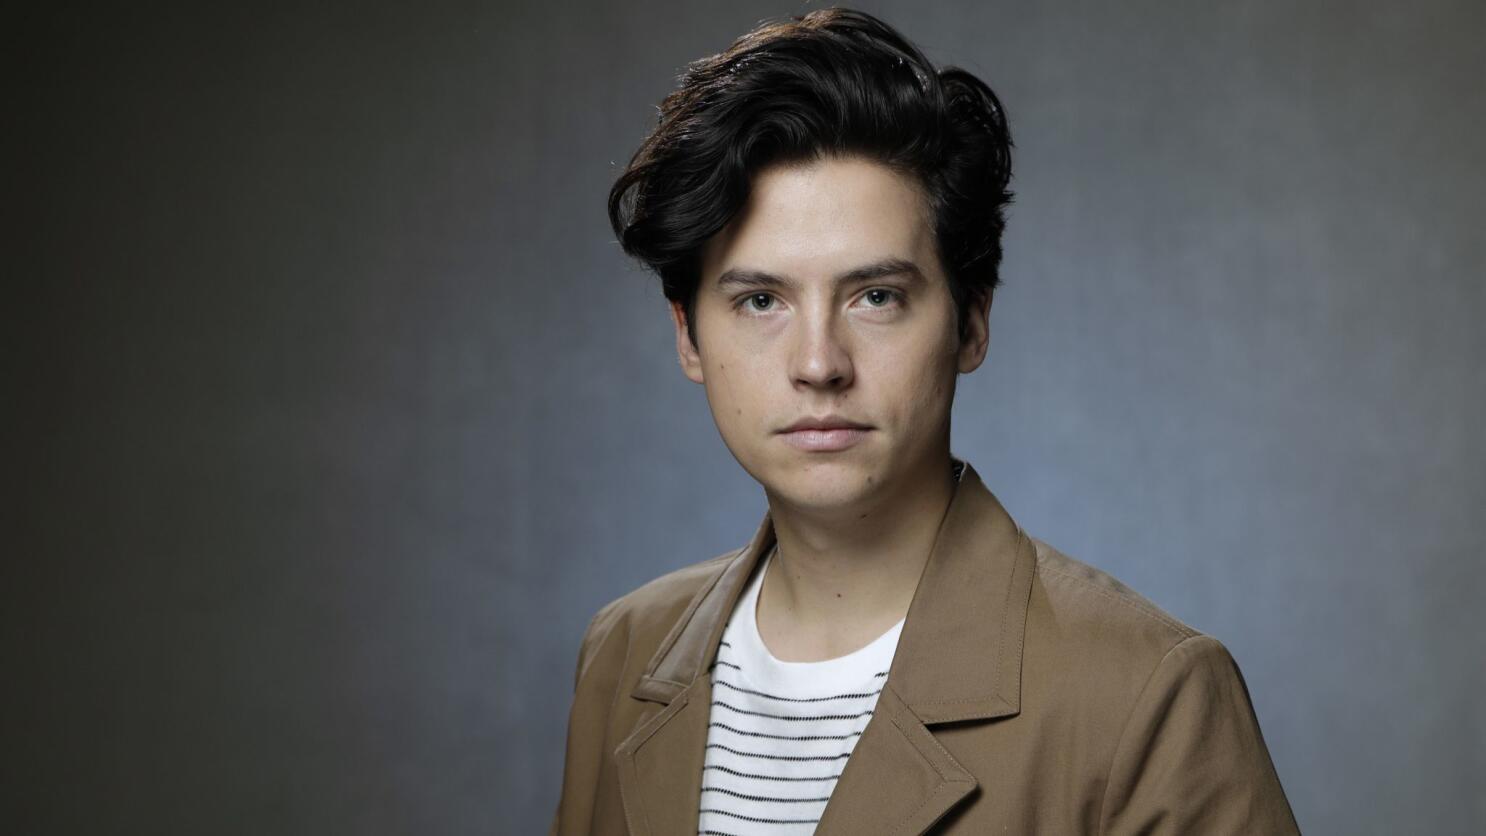 Riverdale' heartthrob Cole Sprouse goes for leading man status in 'Five  Feet Apart' - Los Angeles Times